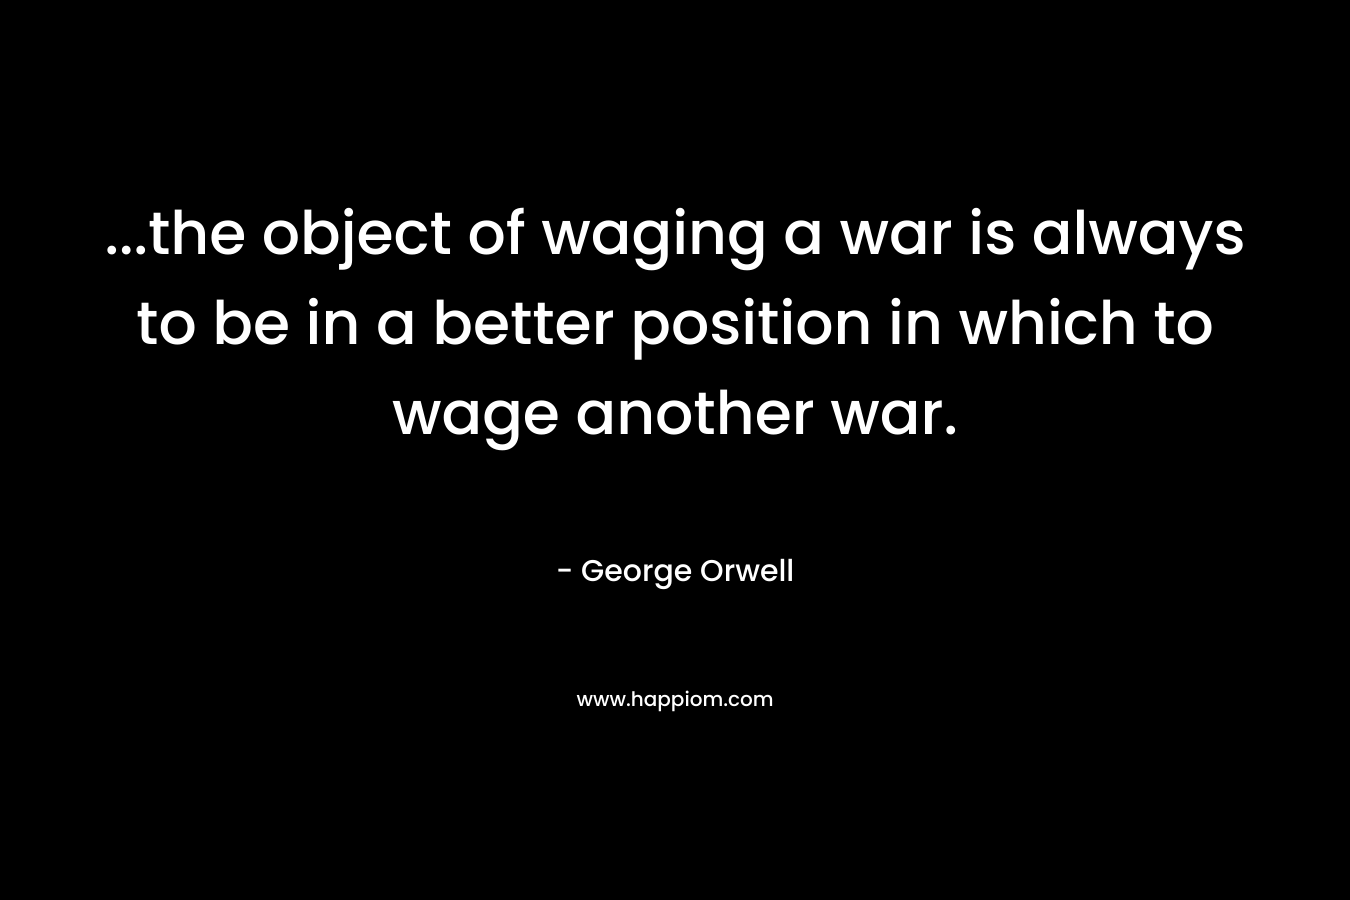 …the object of waging a war is always to be in a better position in which to wage another war. – George Orwell